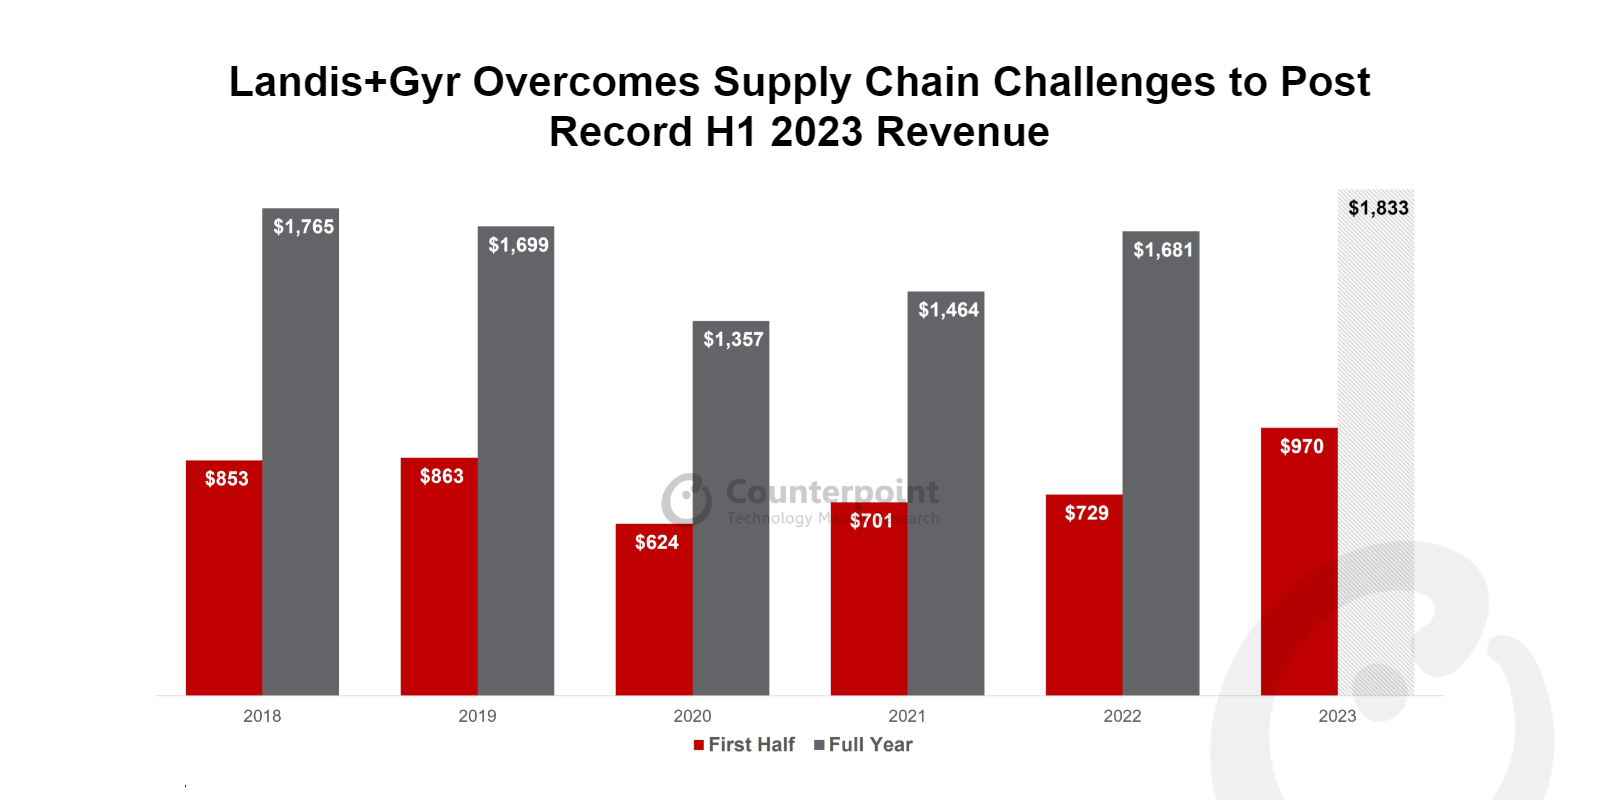 Landis+Gyr Overcomes Supply Chain Challenges to Post Record H1 2023 Revenue